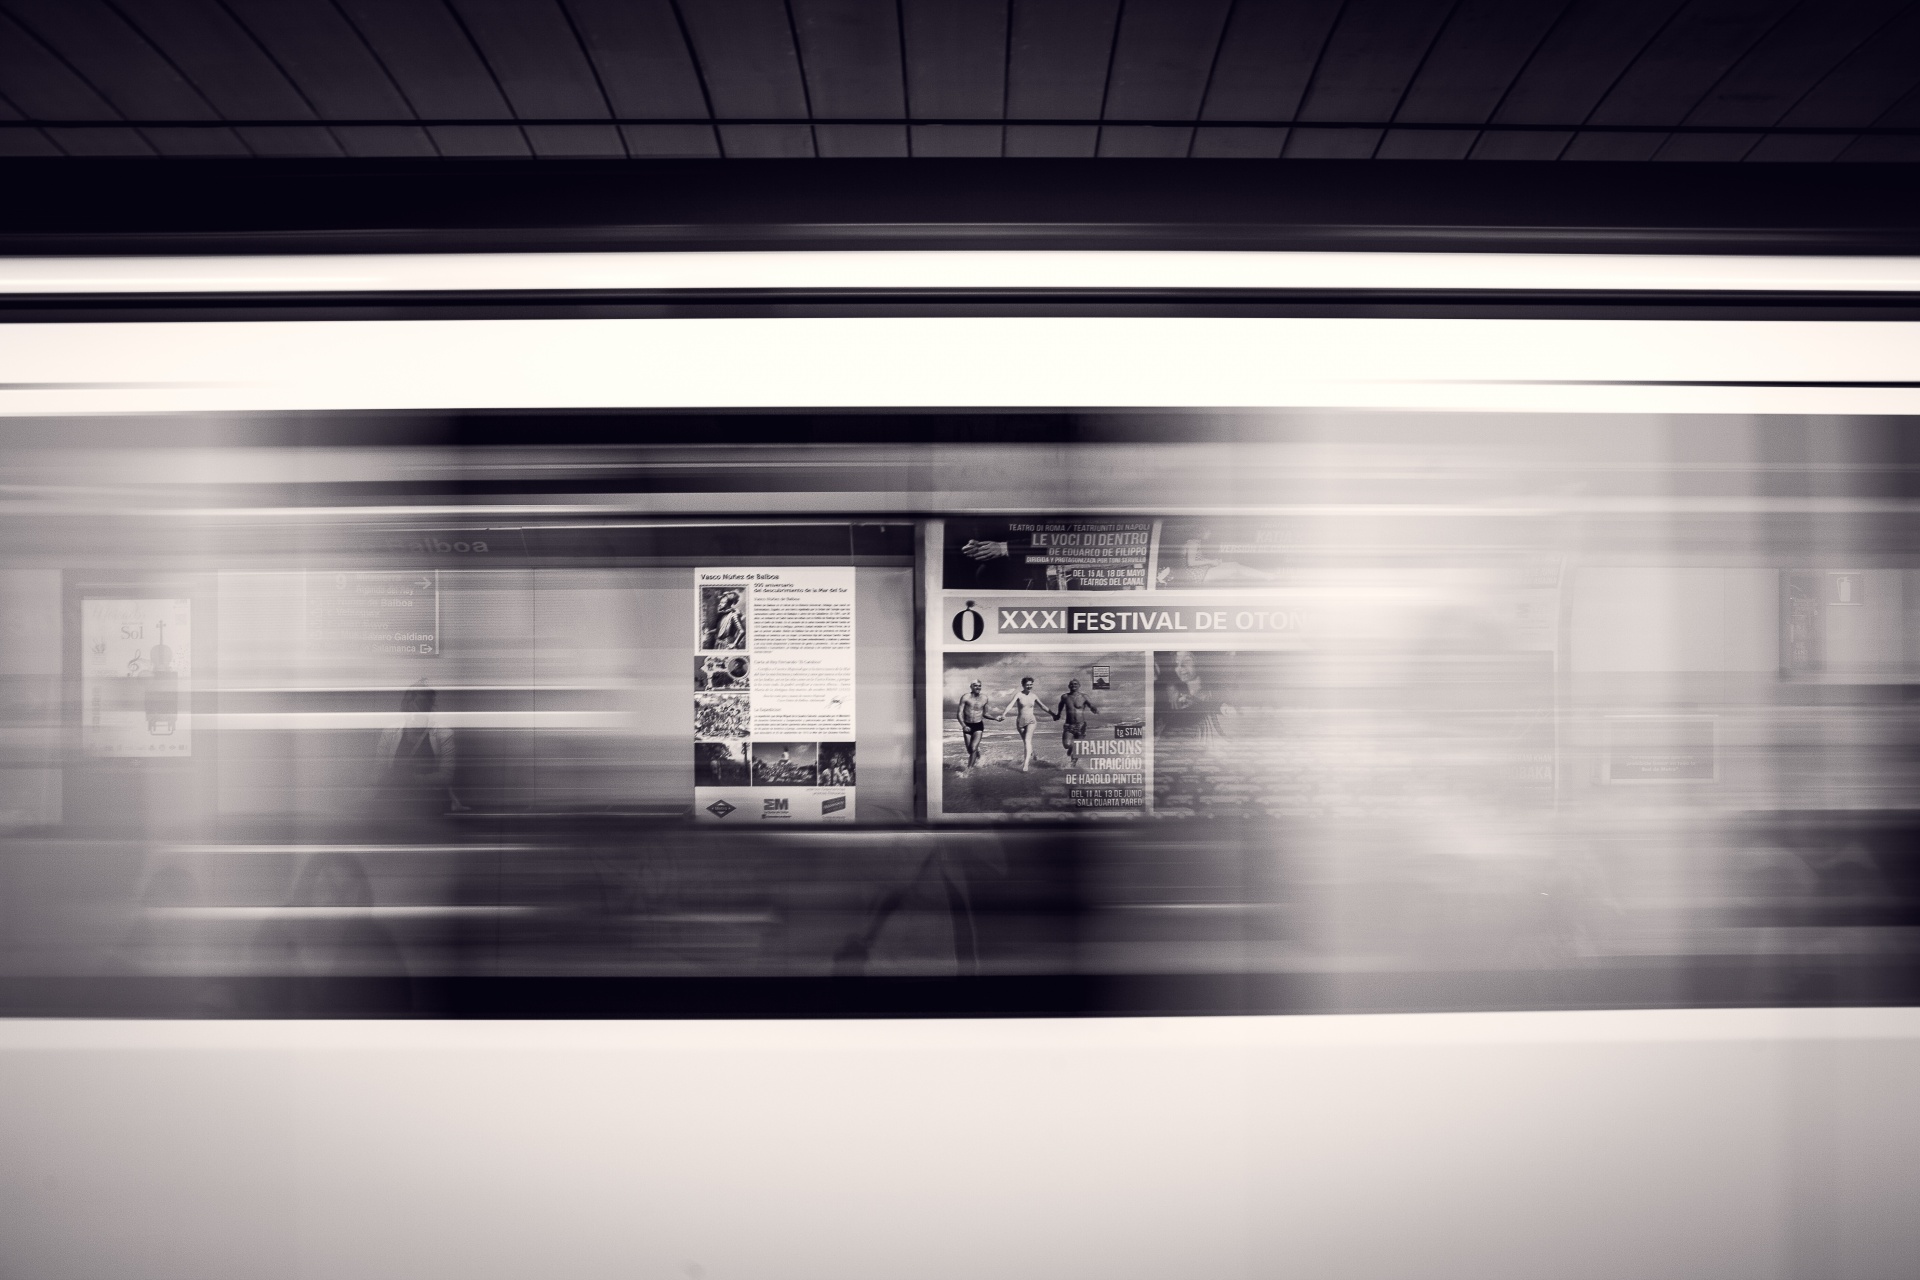 Subway In A Motion Blur